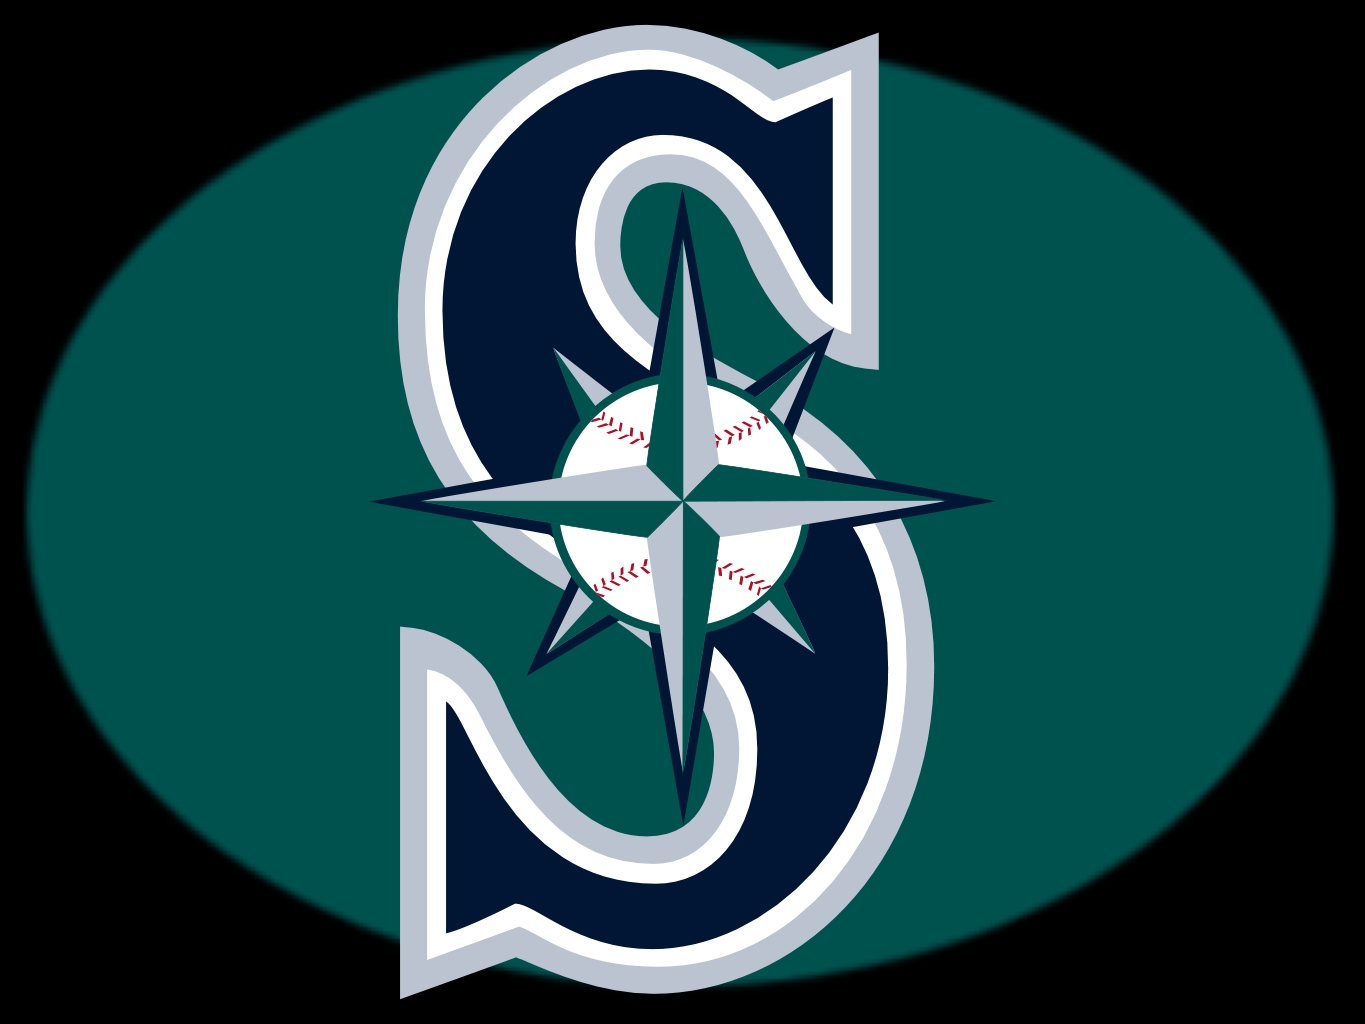 Seattle Mariners Backgrounds, Compatible - PC, Mobile, Gadgets| 1365x1024 px